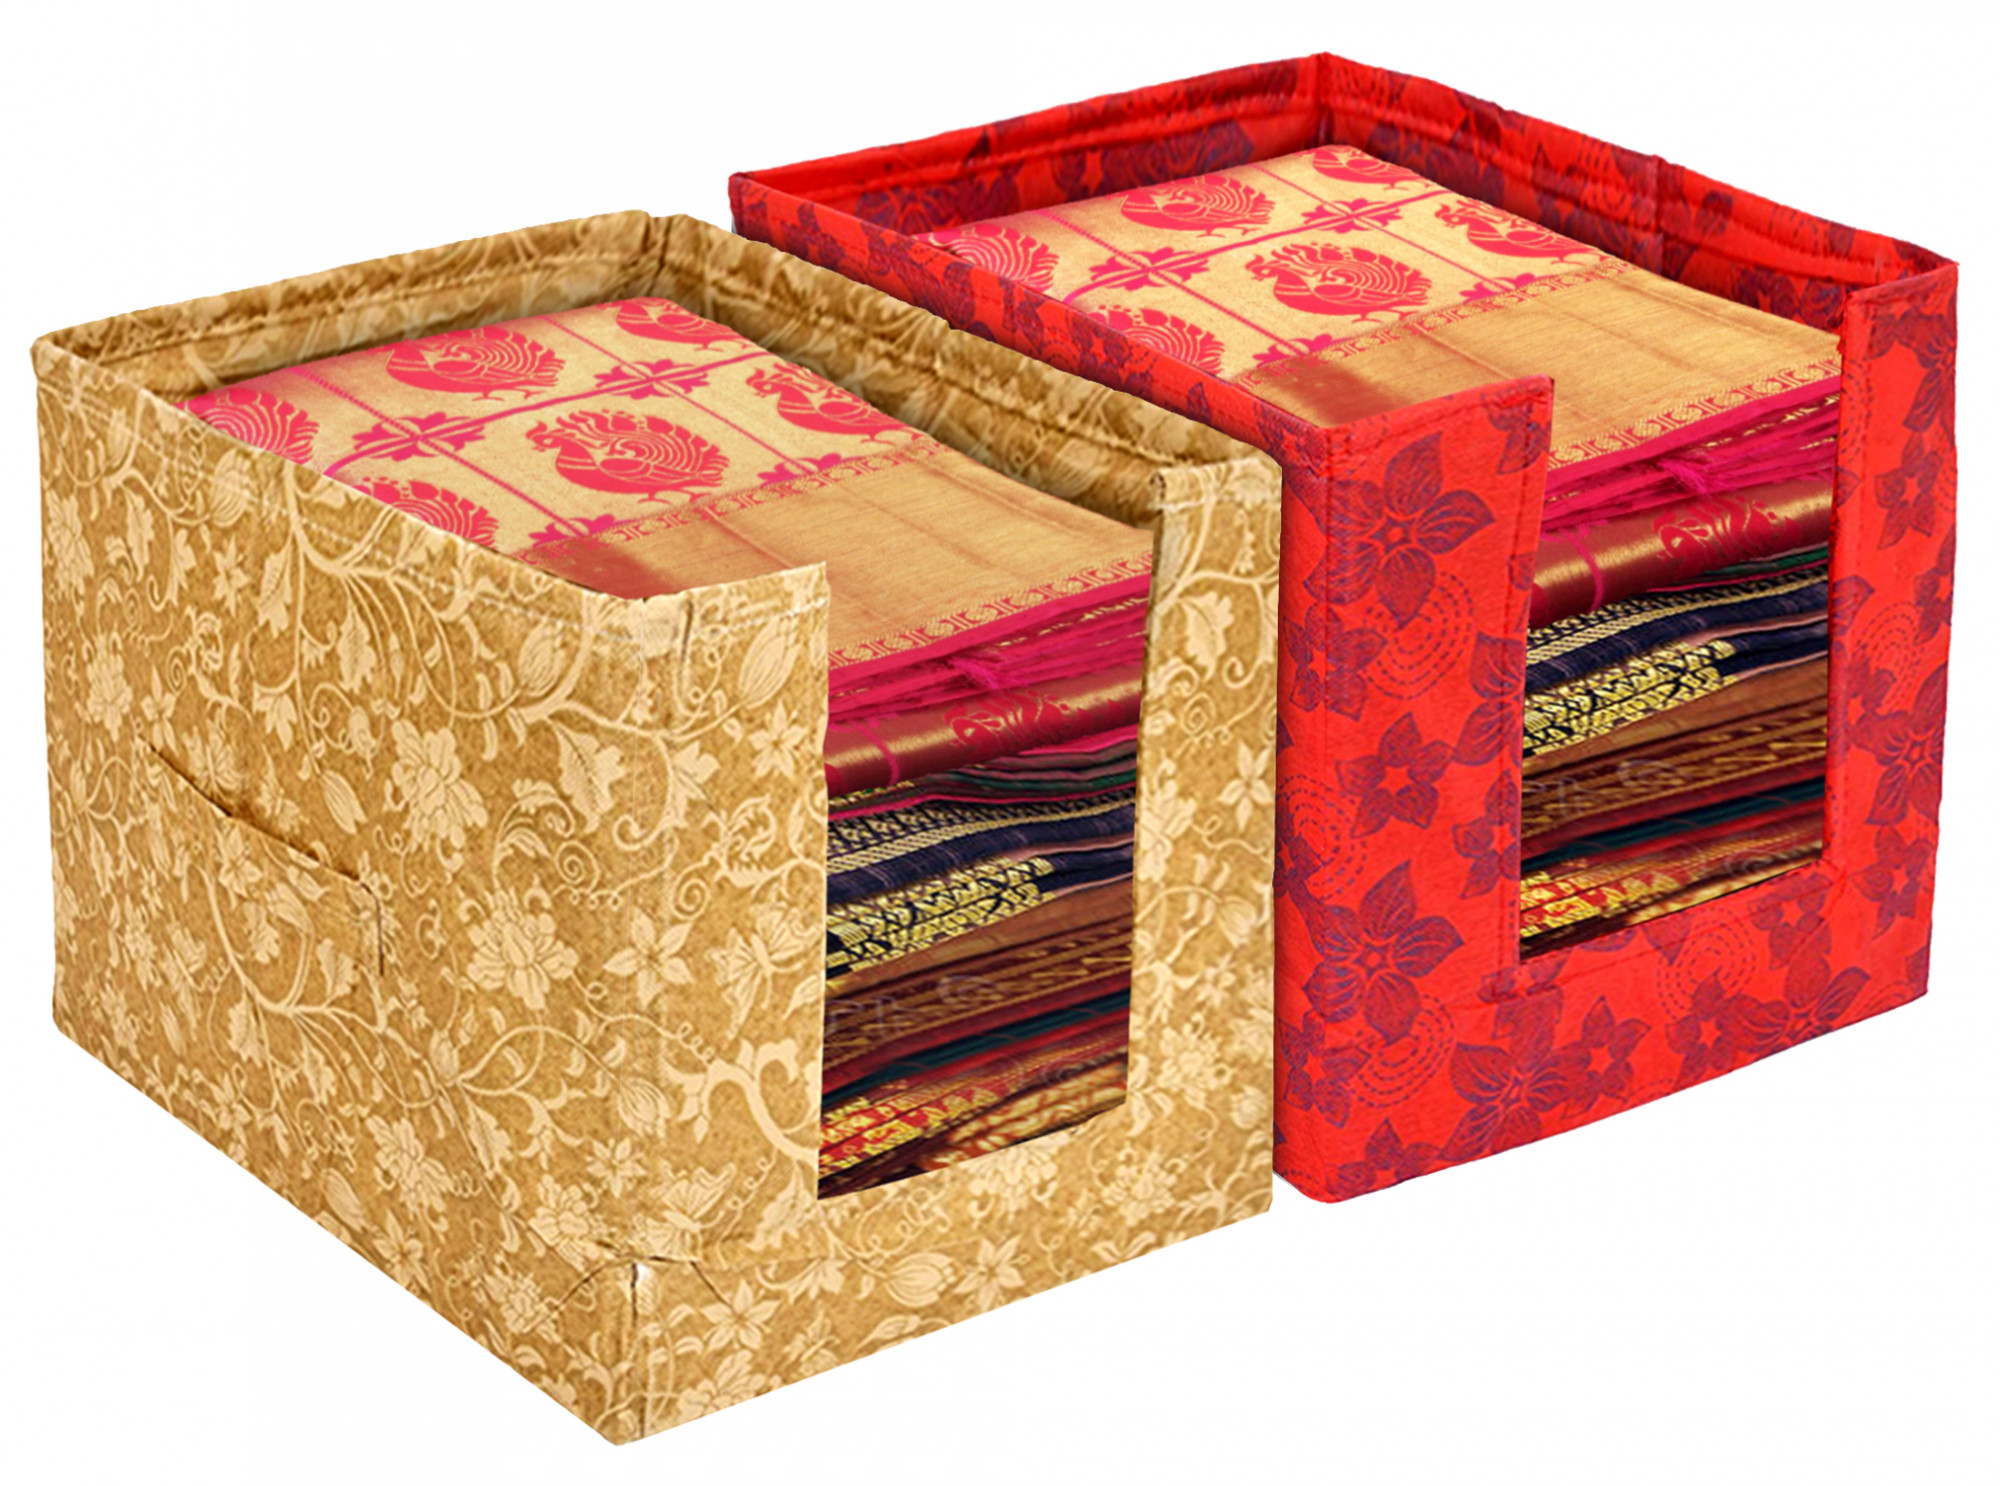 Kuber Industries Metalic Flower Print Foldable Rectangle Cloth Saree Stacker Cloth Wardrobe Organizer- Pack of 2 (Beige & Red)